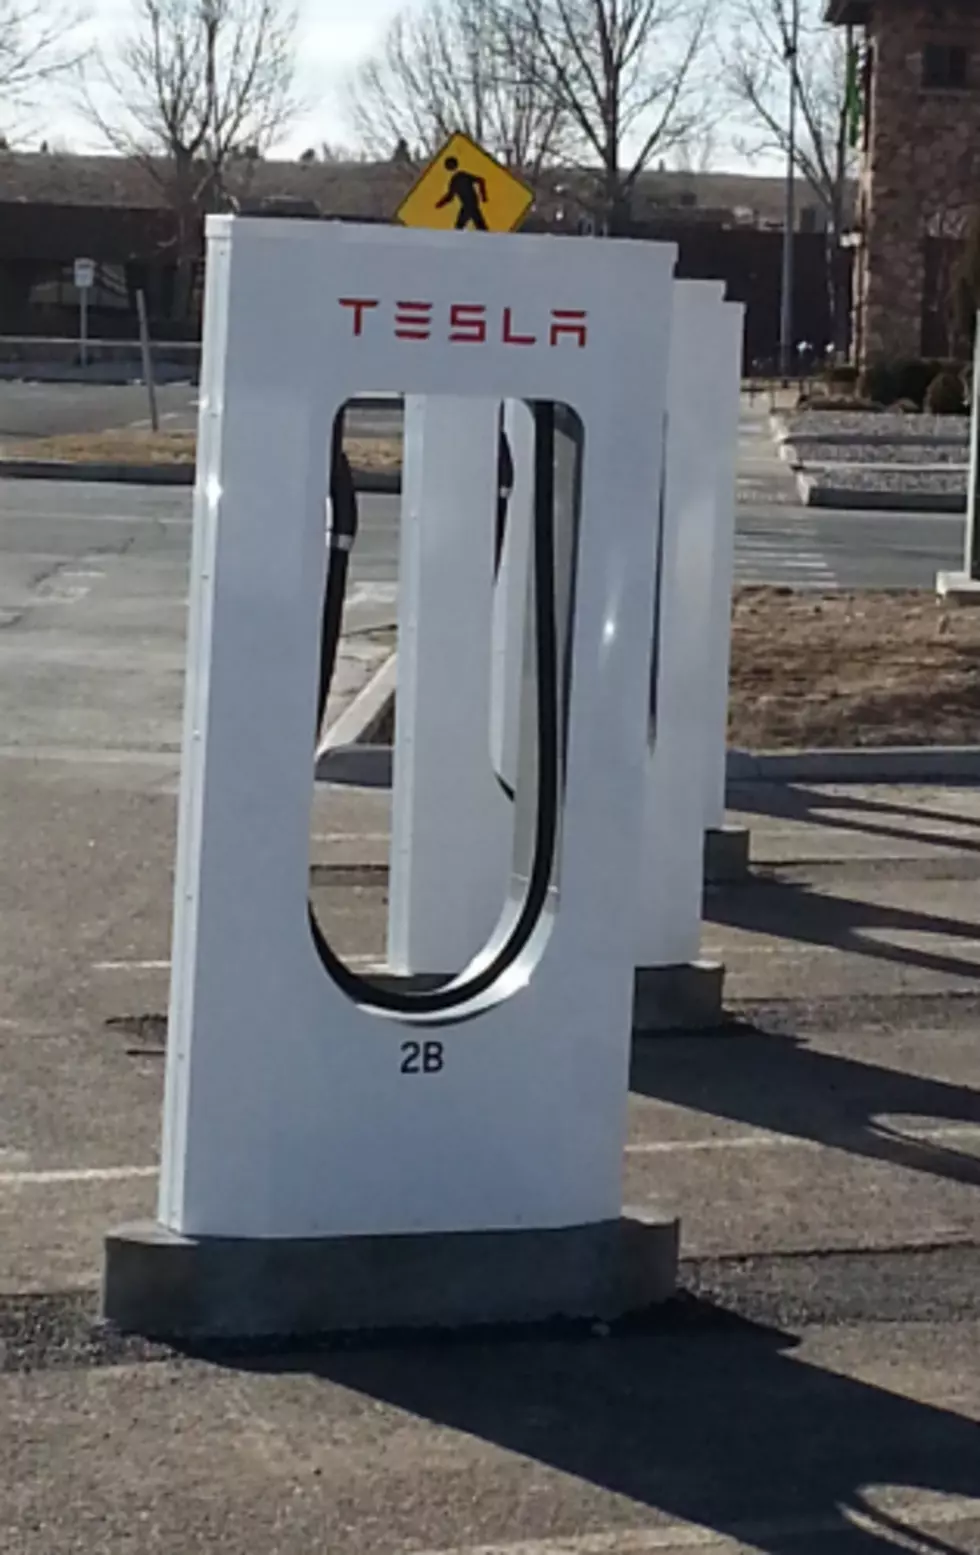 Tesla: Charging Stations Now in Cheyenne